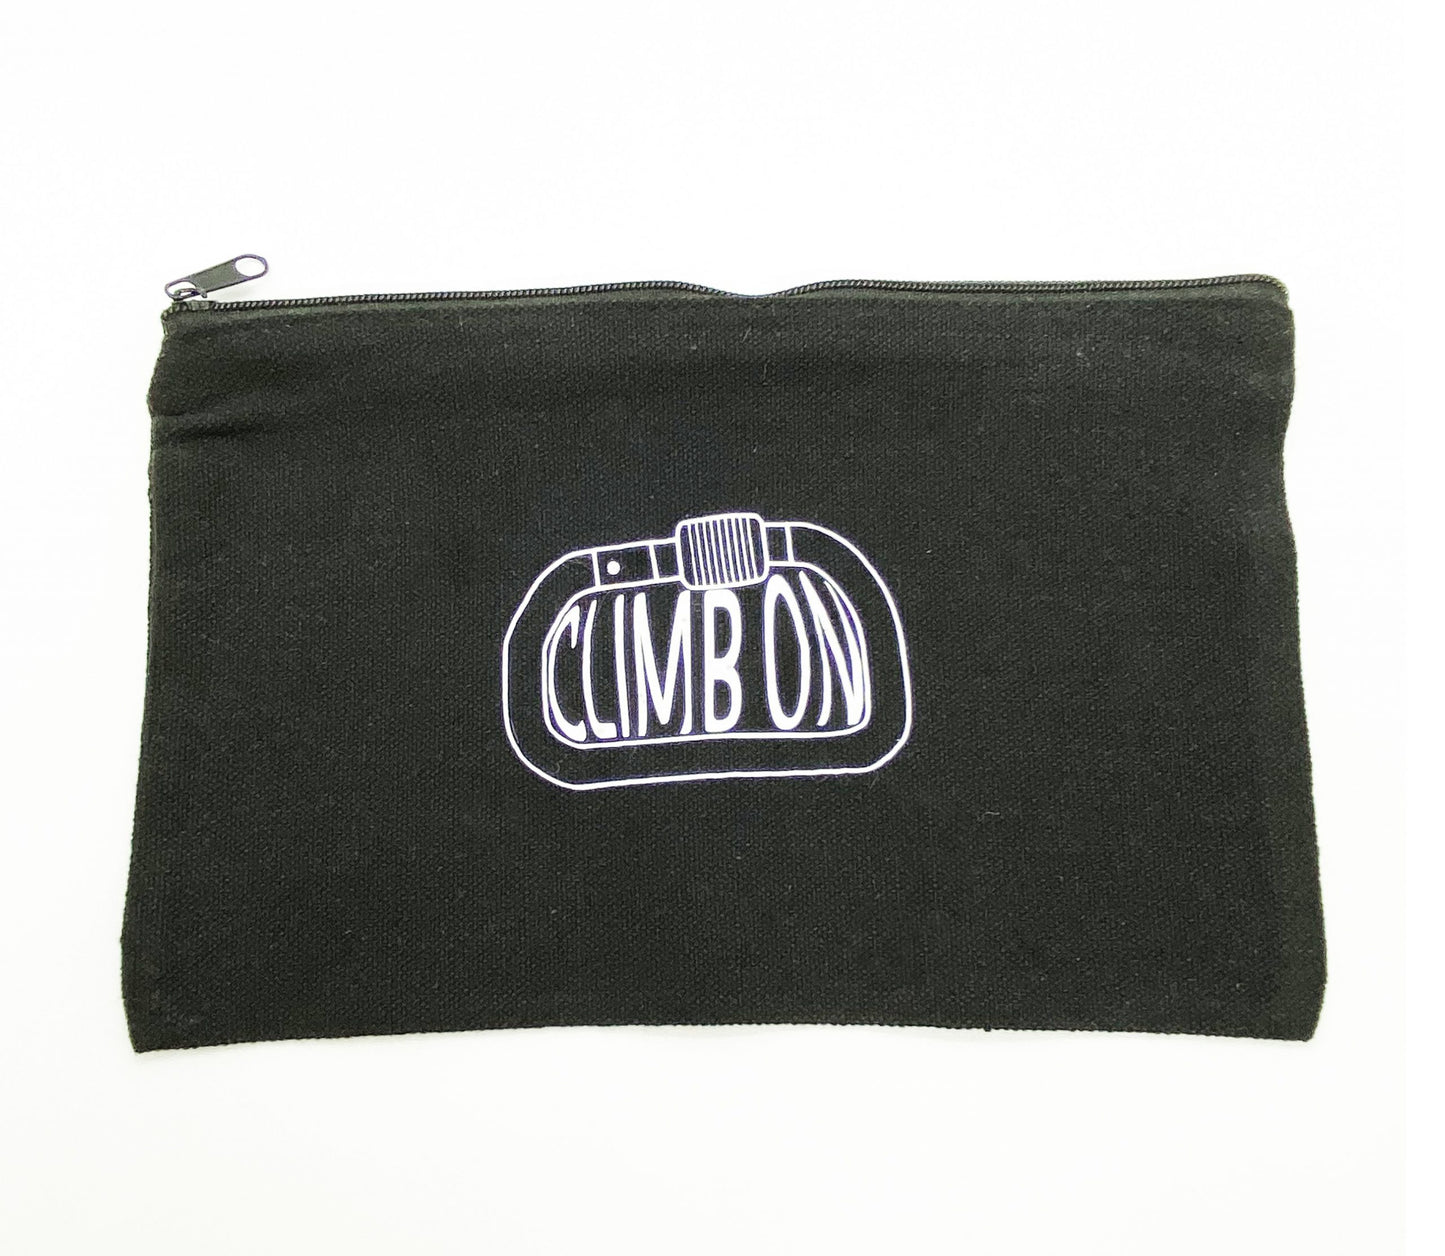 Climb on carbiner makeup pouch